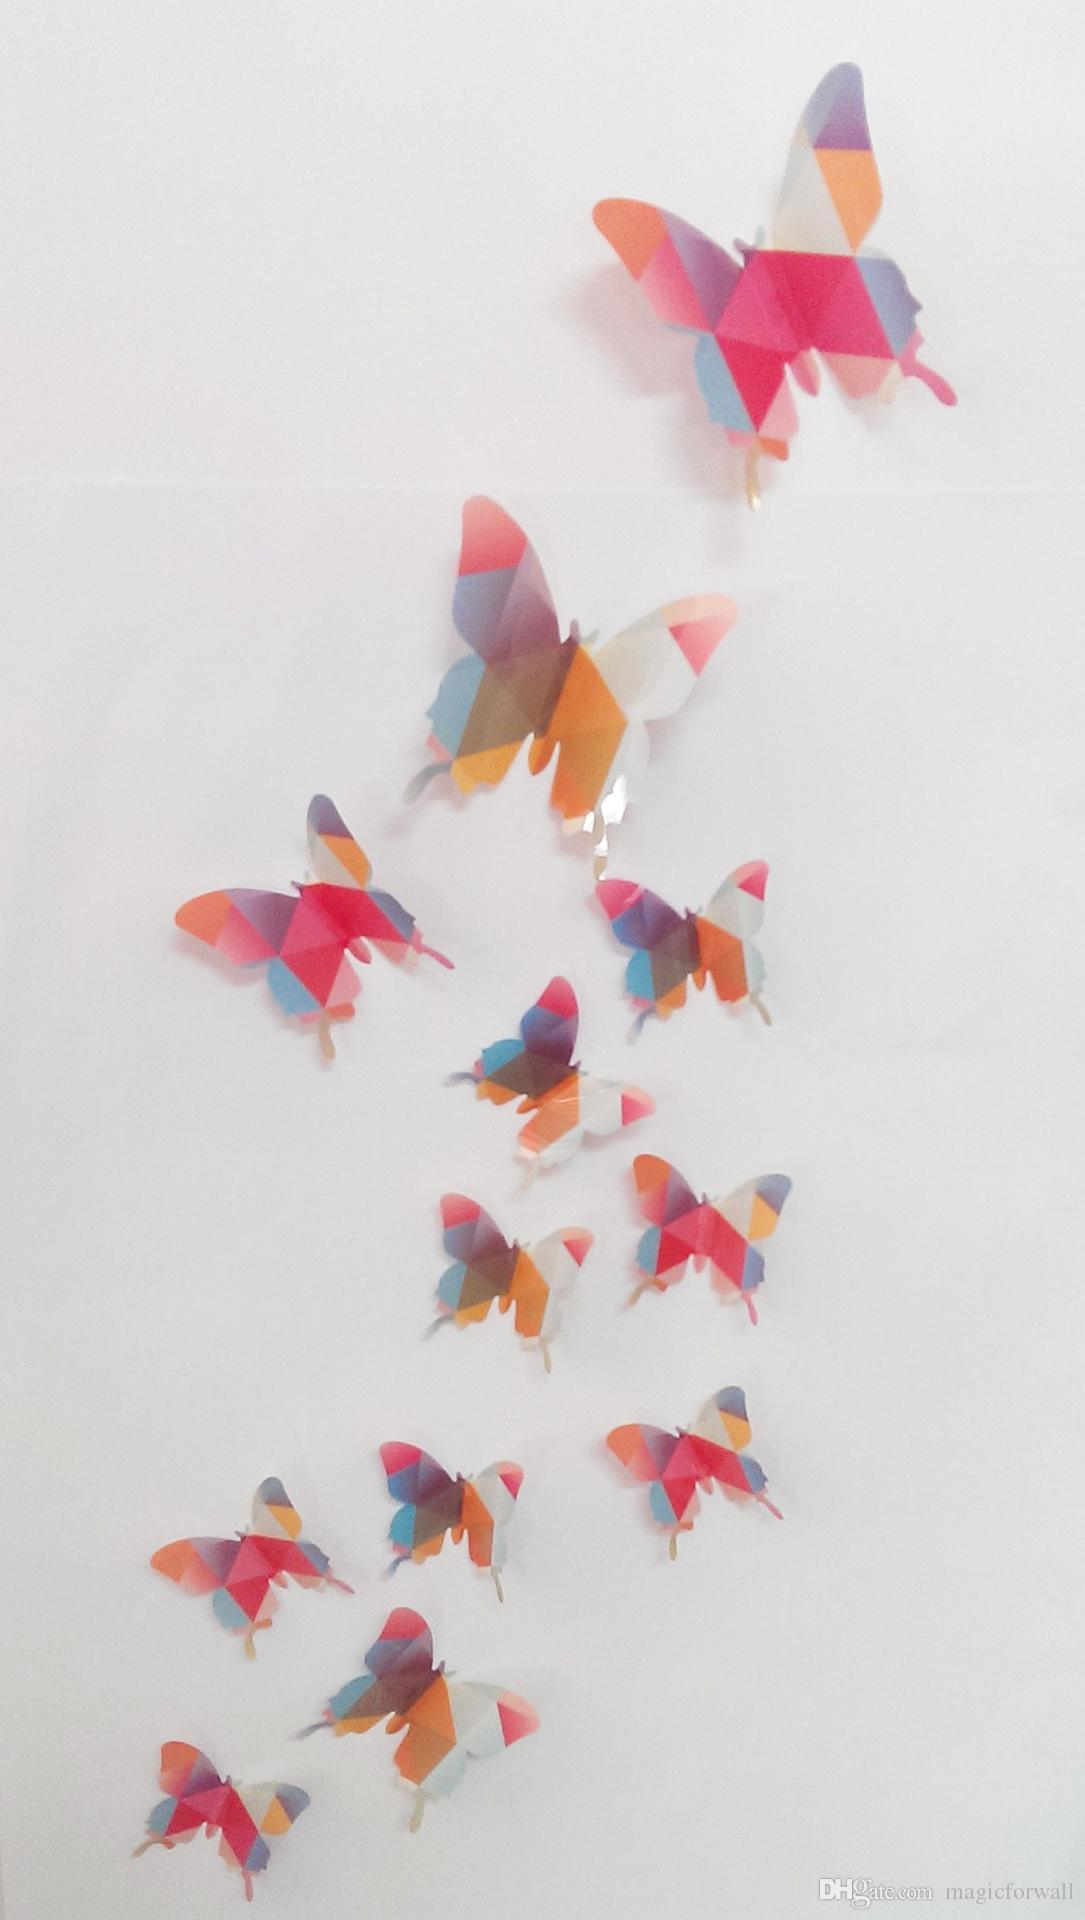 Origami Butterfly Wall 12pcspack 3d Colorful Butterfly Wall Decals Diy Home Party Wedding Decoration Wall Stickers Poster Kitchen Refrigerator Wall Mural Applique